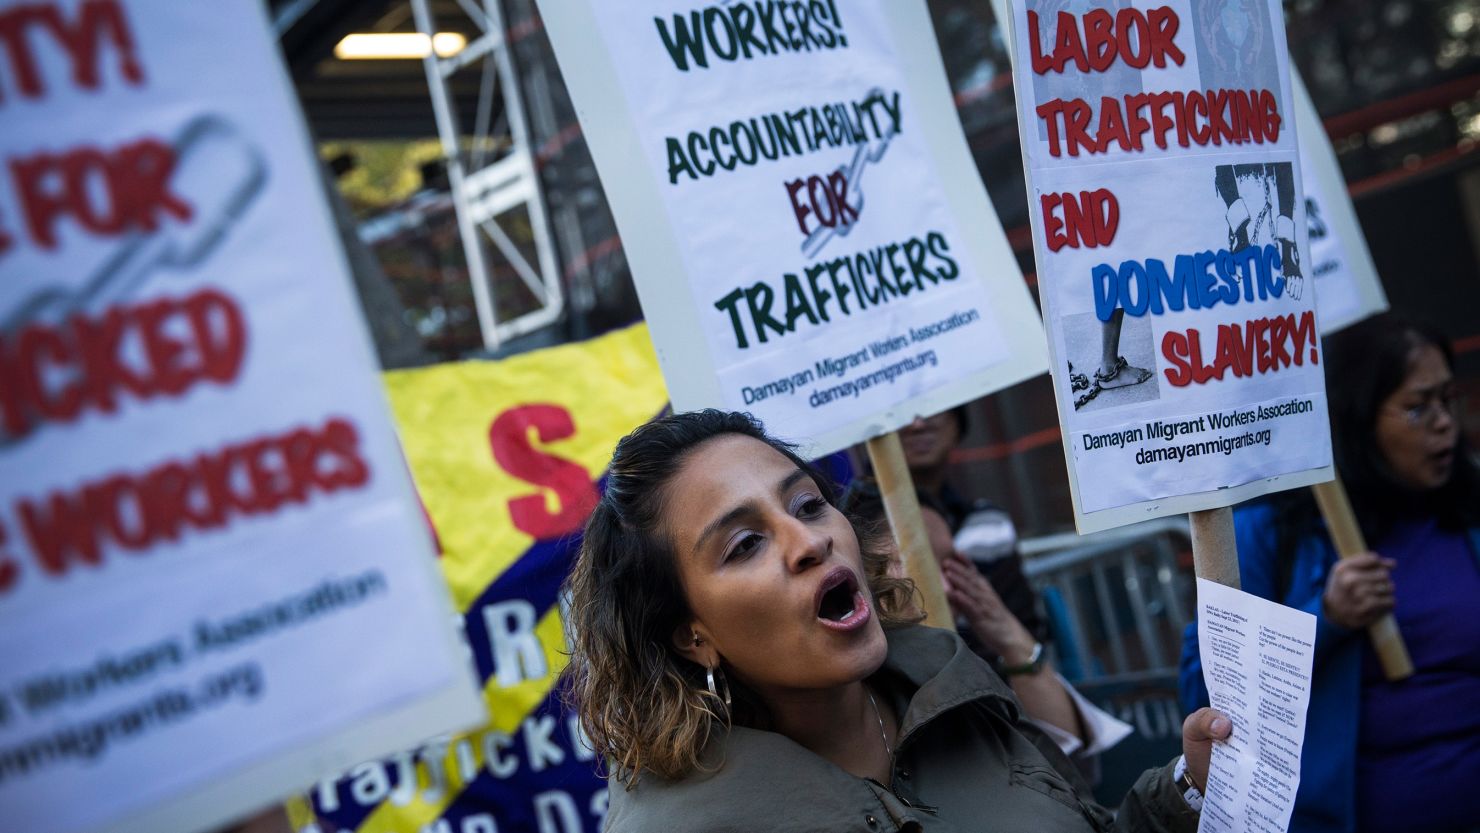 Protests against labor trafficking and modern day slavery outside the United Nations on September 23, 2013, New York.